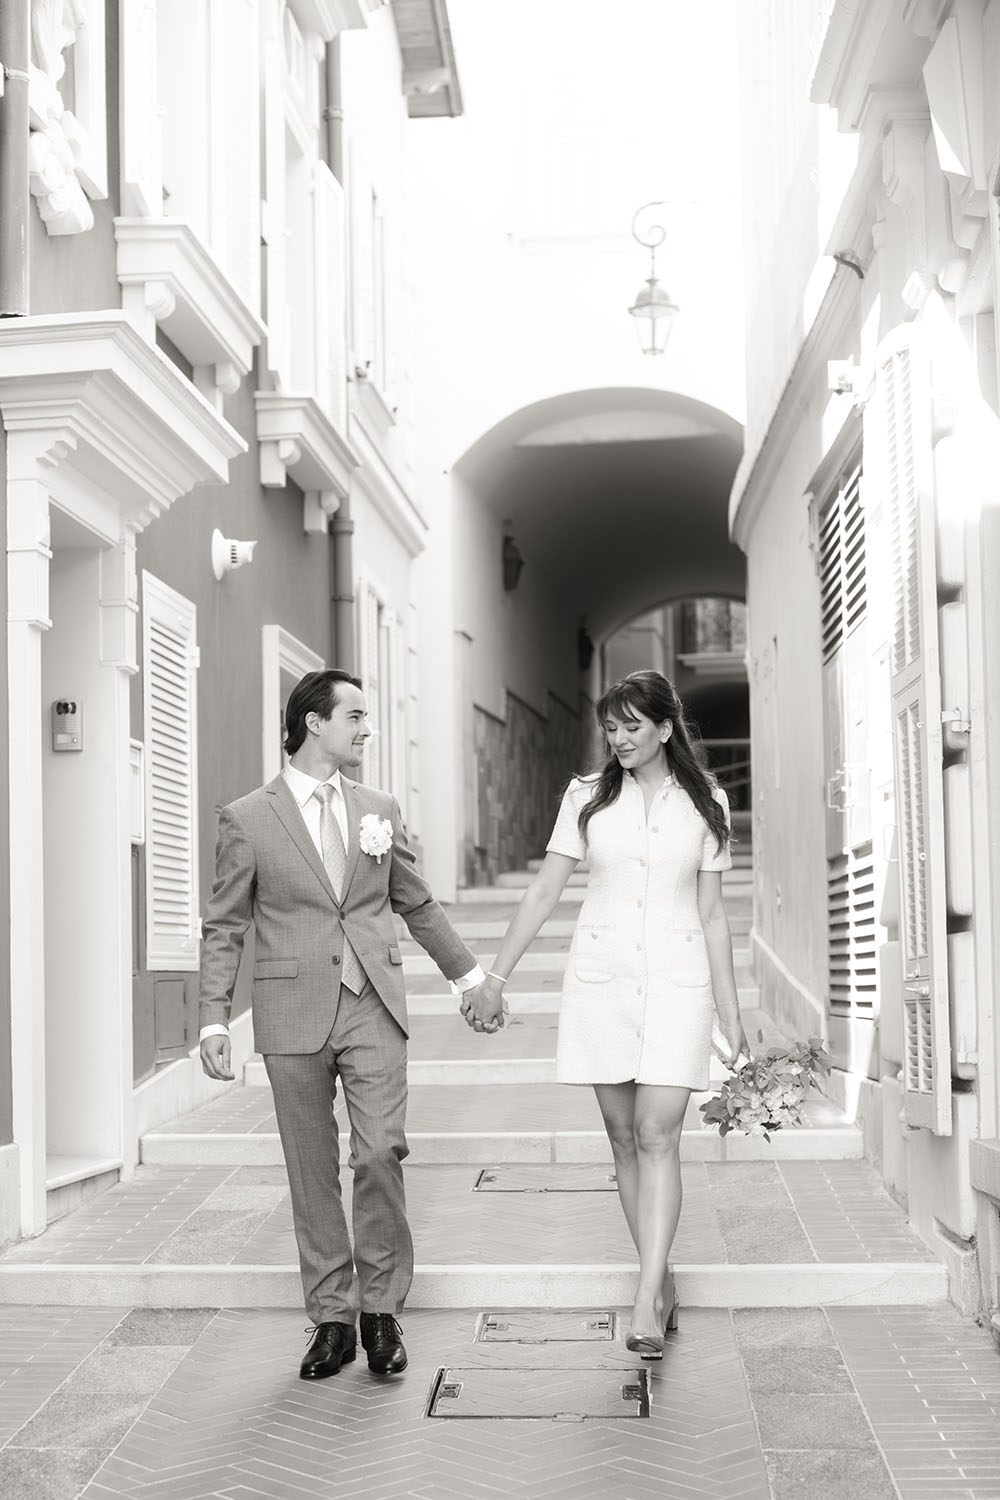 the couple walk in the street